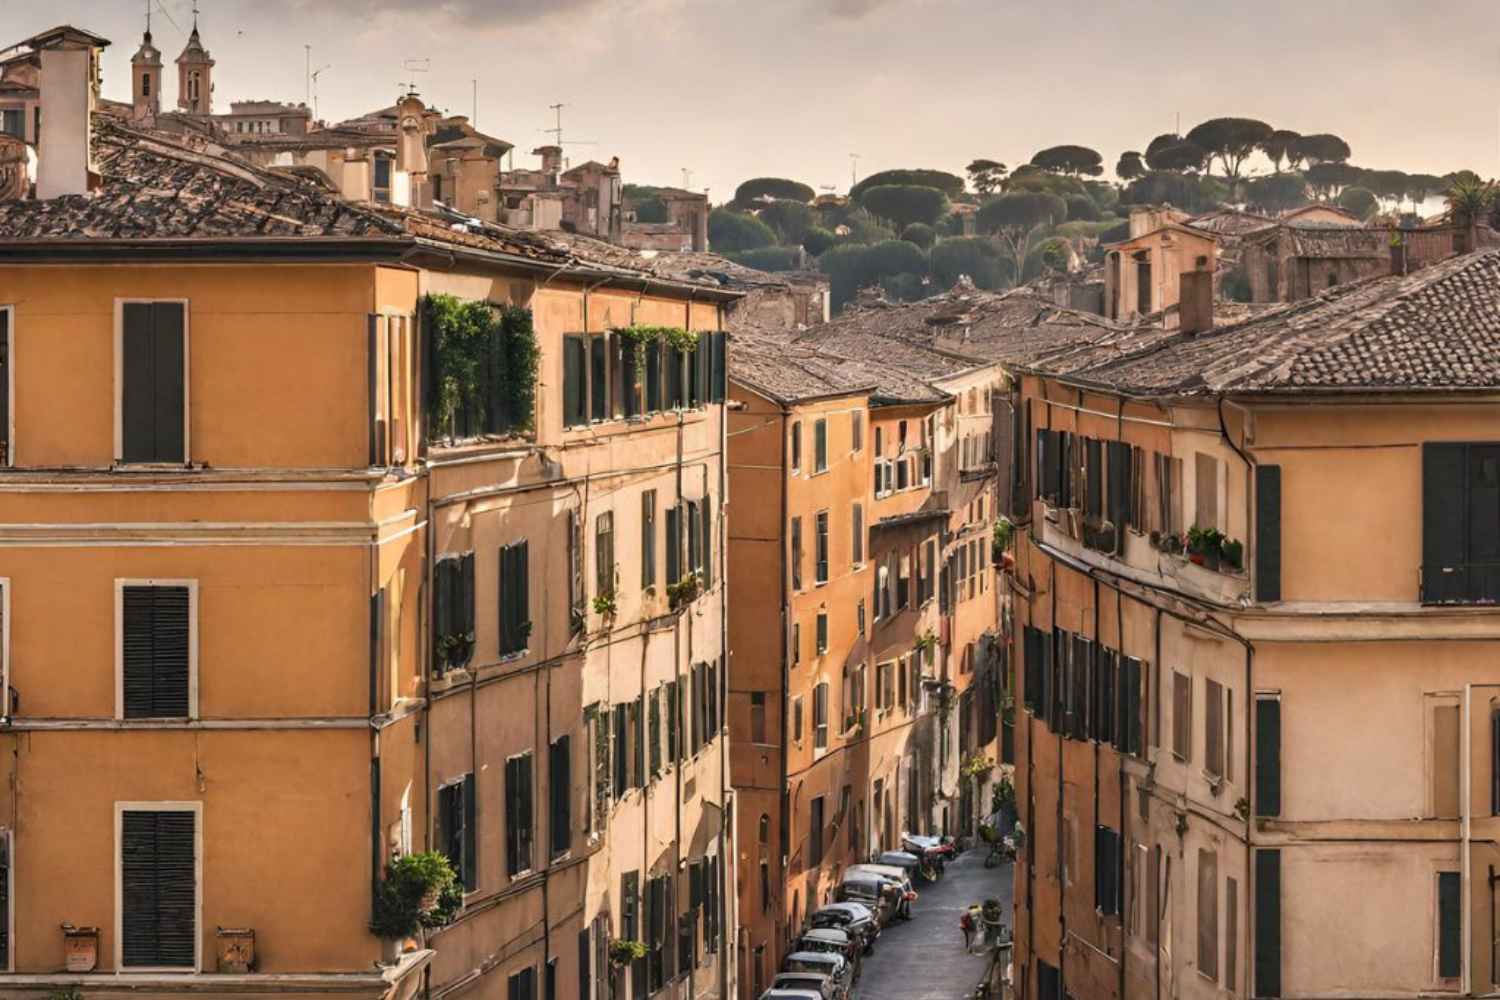 Rome has a diverse and varied set of neighborhoods each with their own characters and secrets to explore.